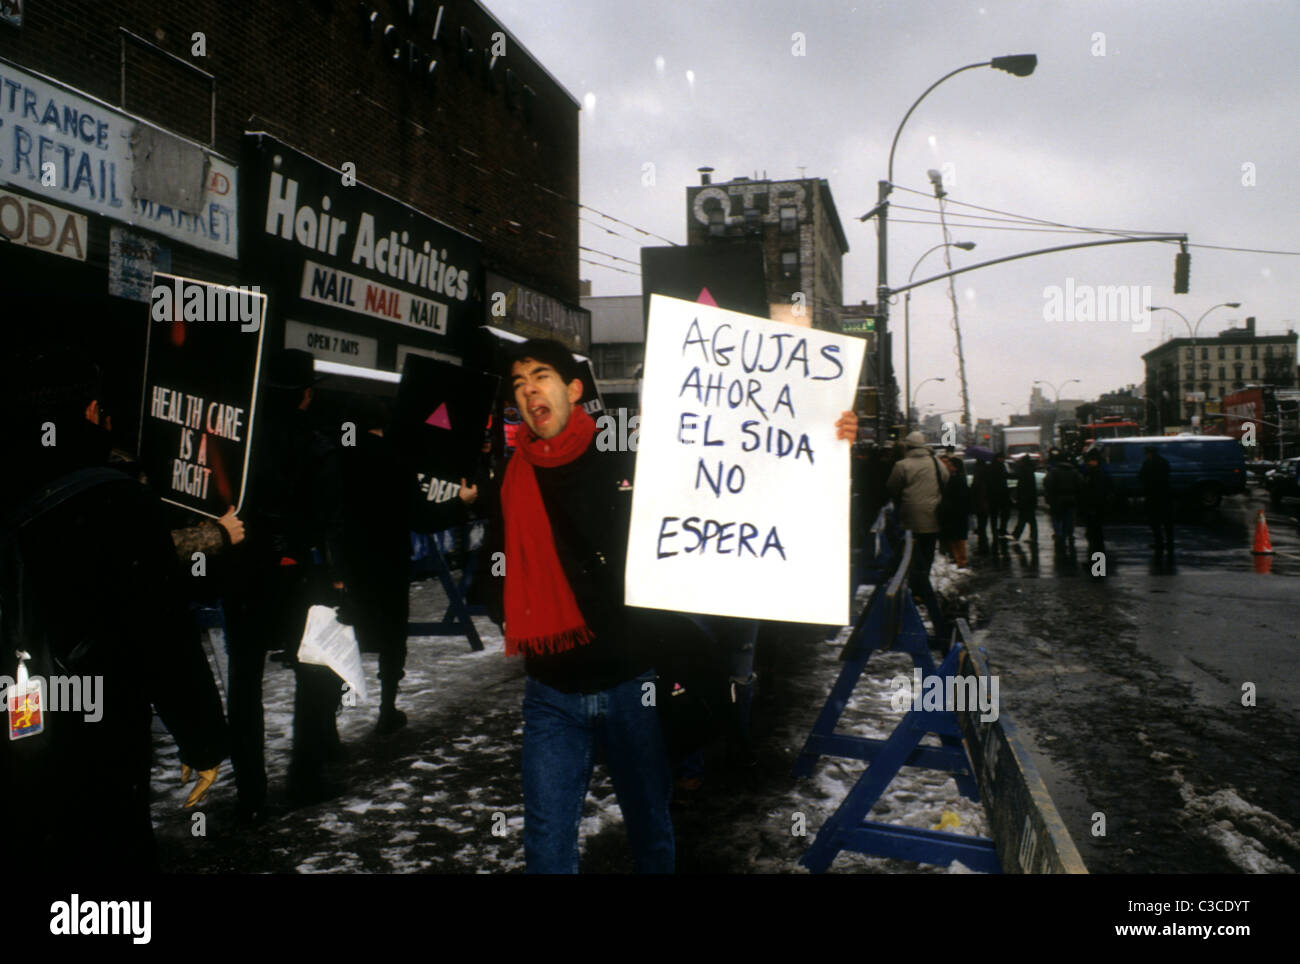 ACT UP protests for legal needle exchange programs in the Lower East Side neighborhood of New York Stock Photo